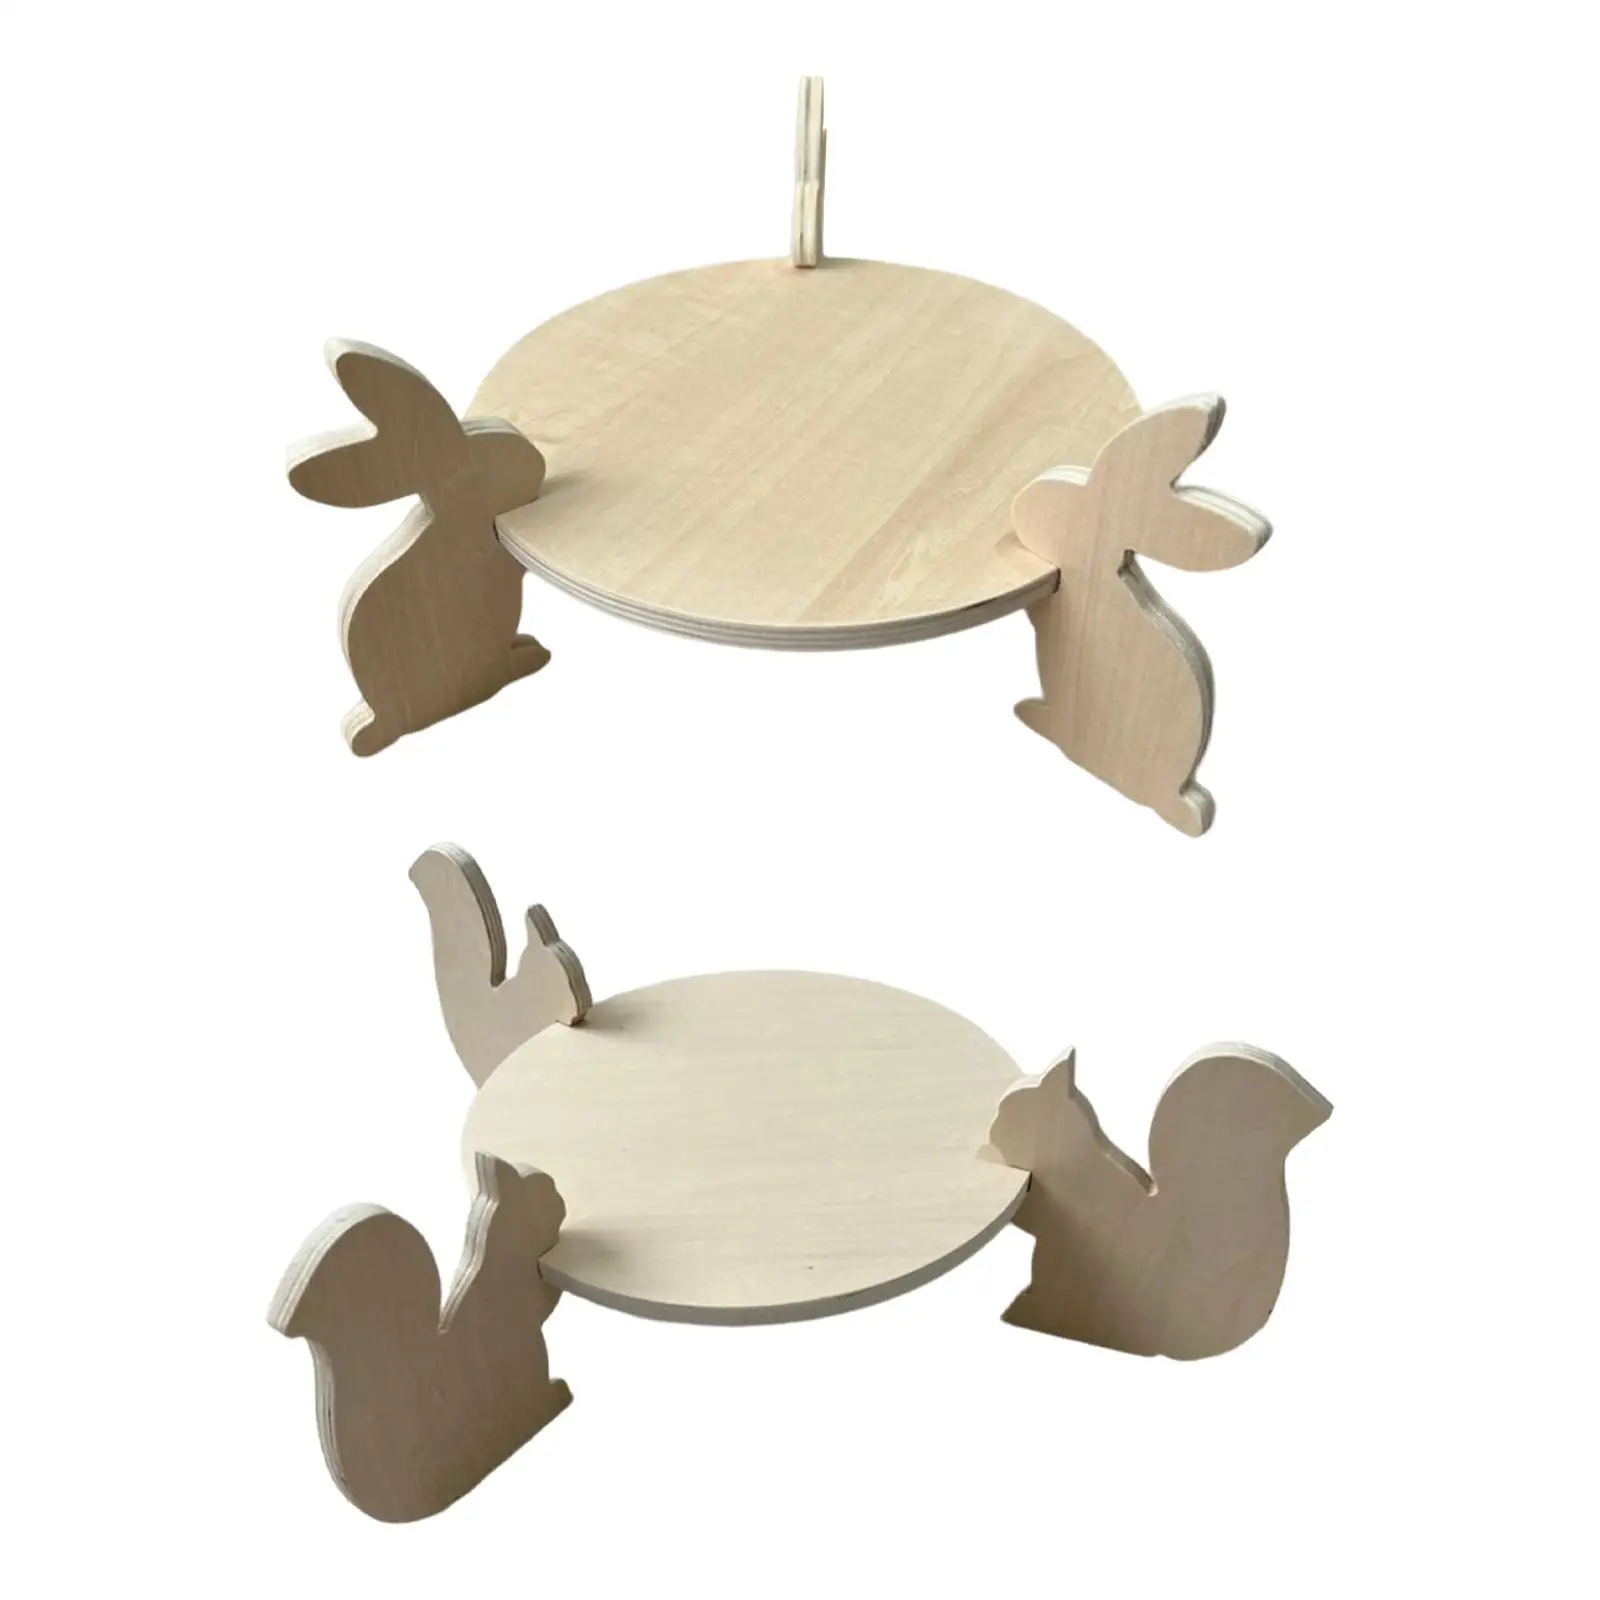 9.8in Cake Holder Serving Tray Dessert Plates Tableware Crafts Display Wood Cake Stand for Holiday Birthday Home Party Snacks